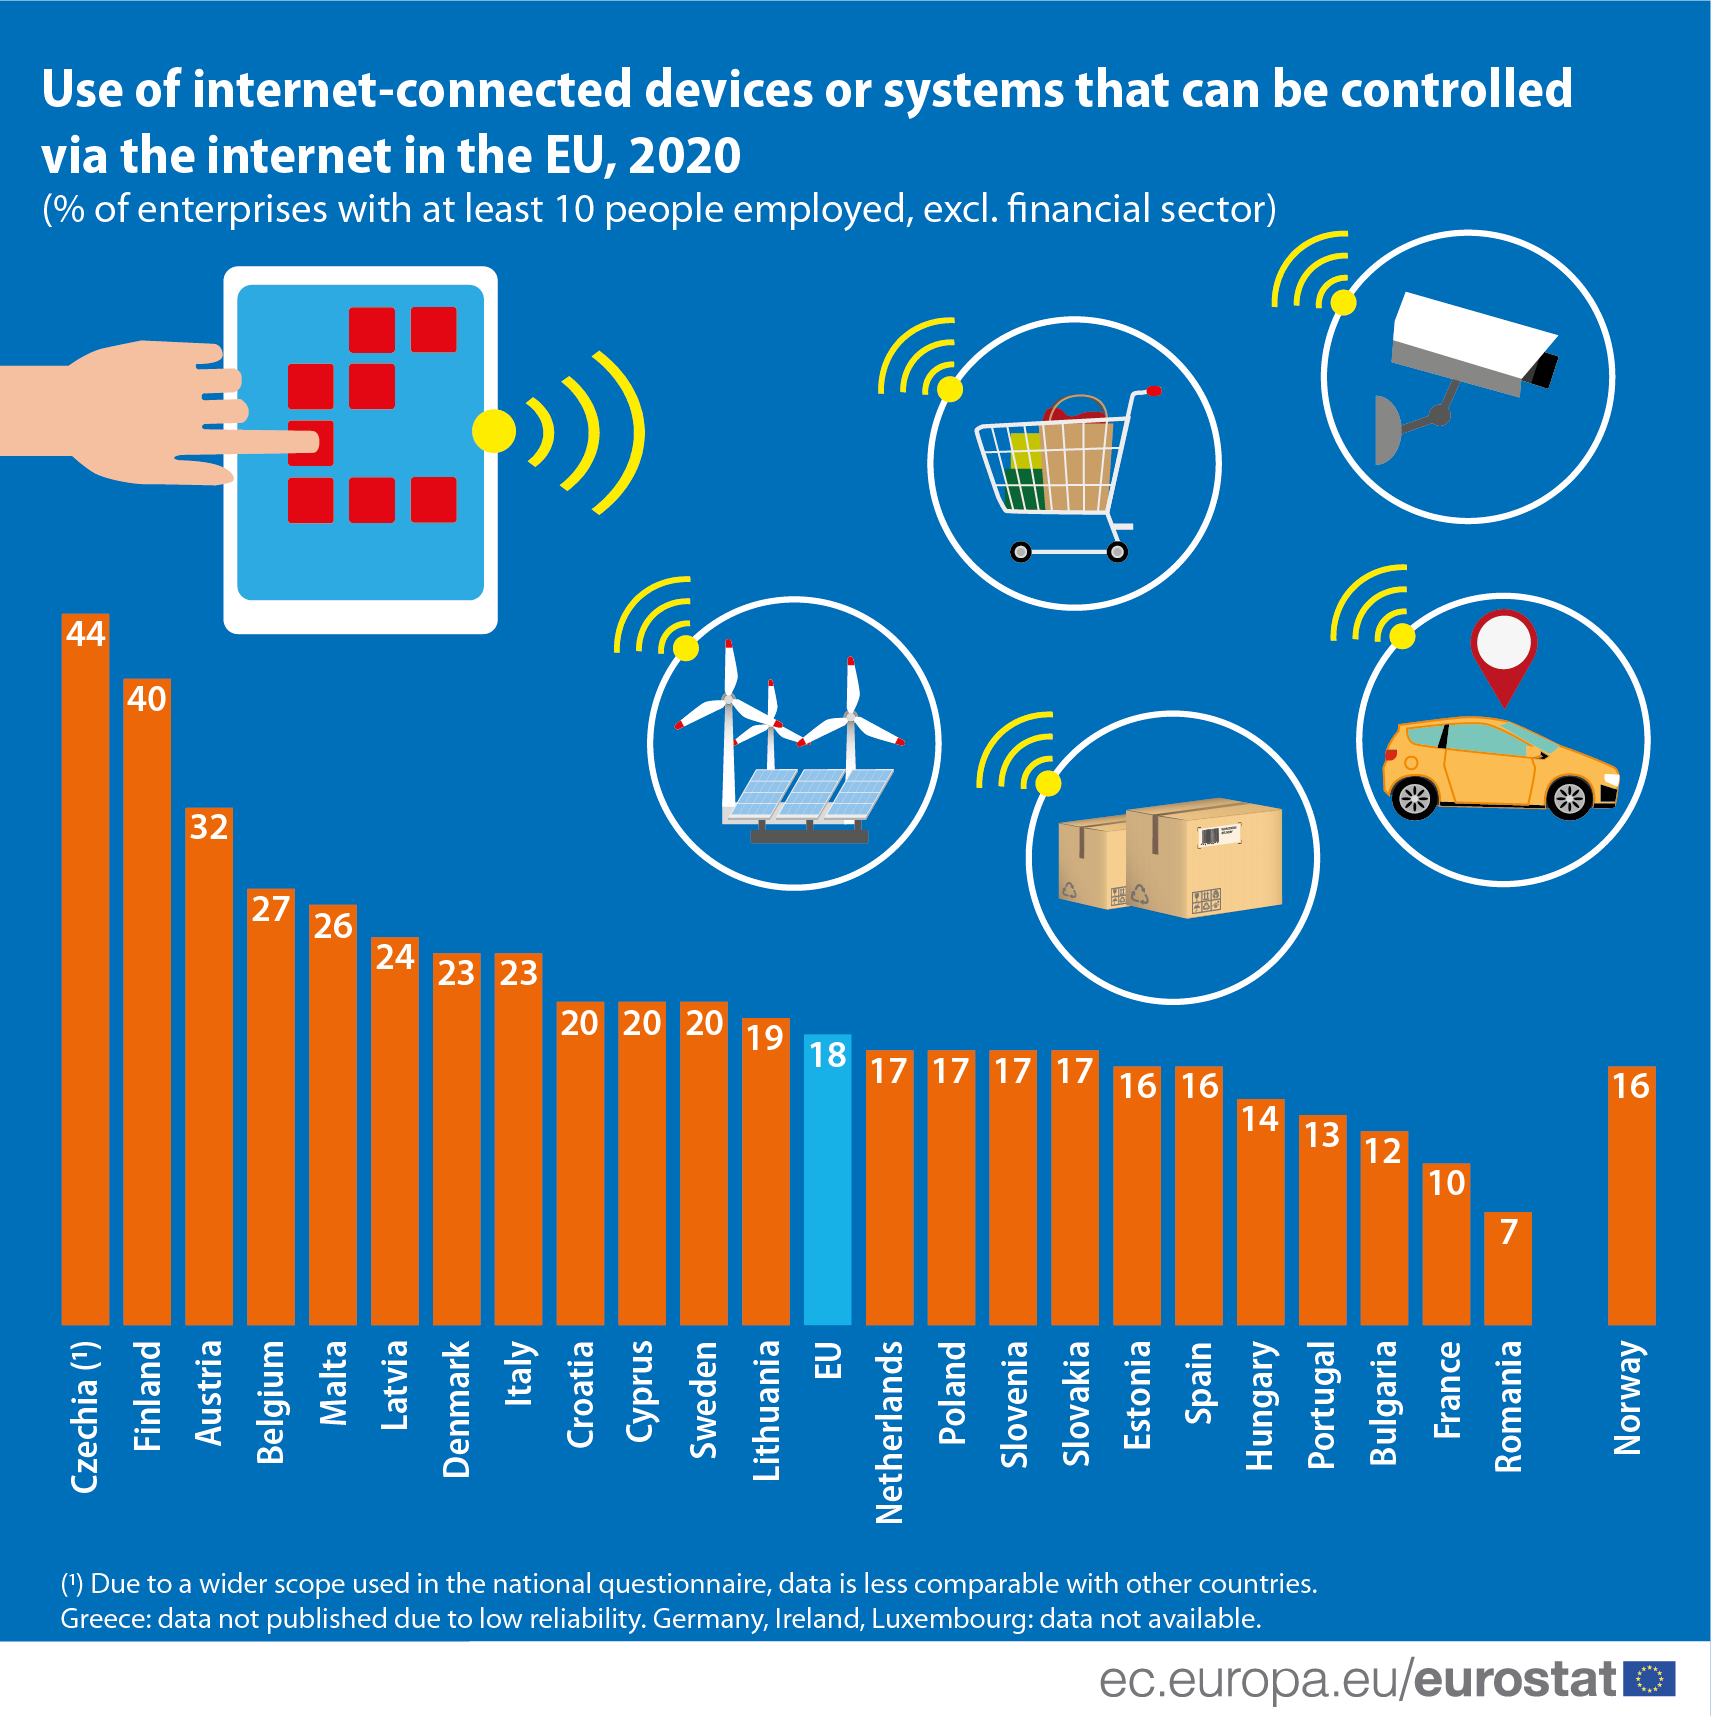 Internet of Things (IoT) in Europe - statistics & facts